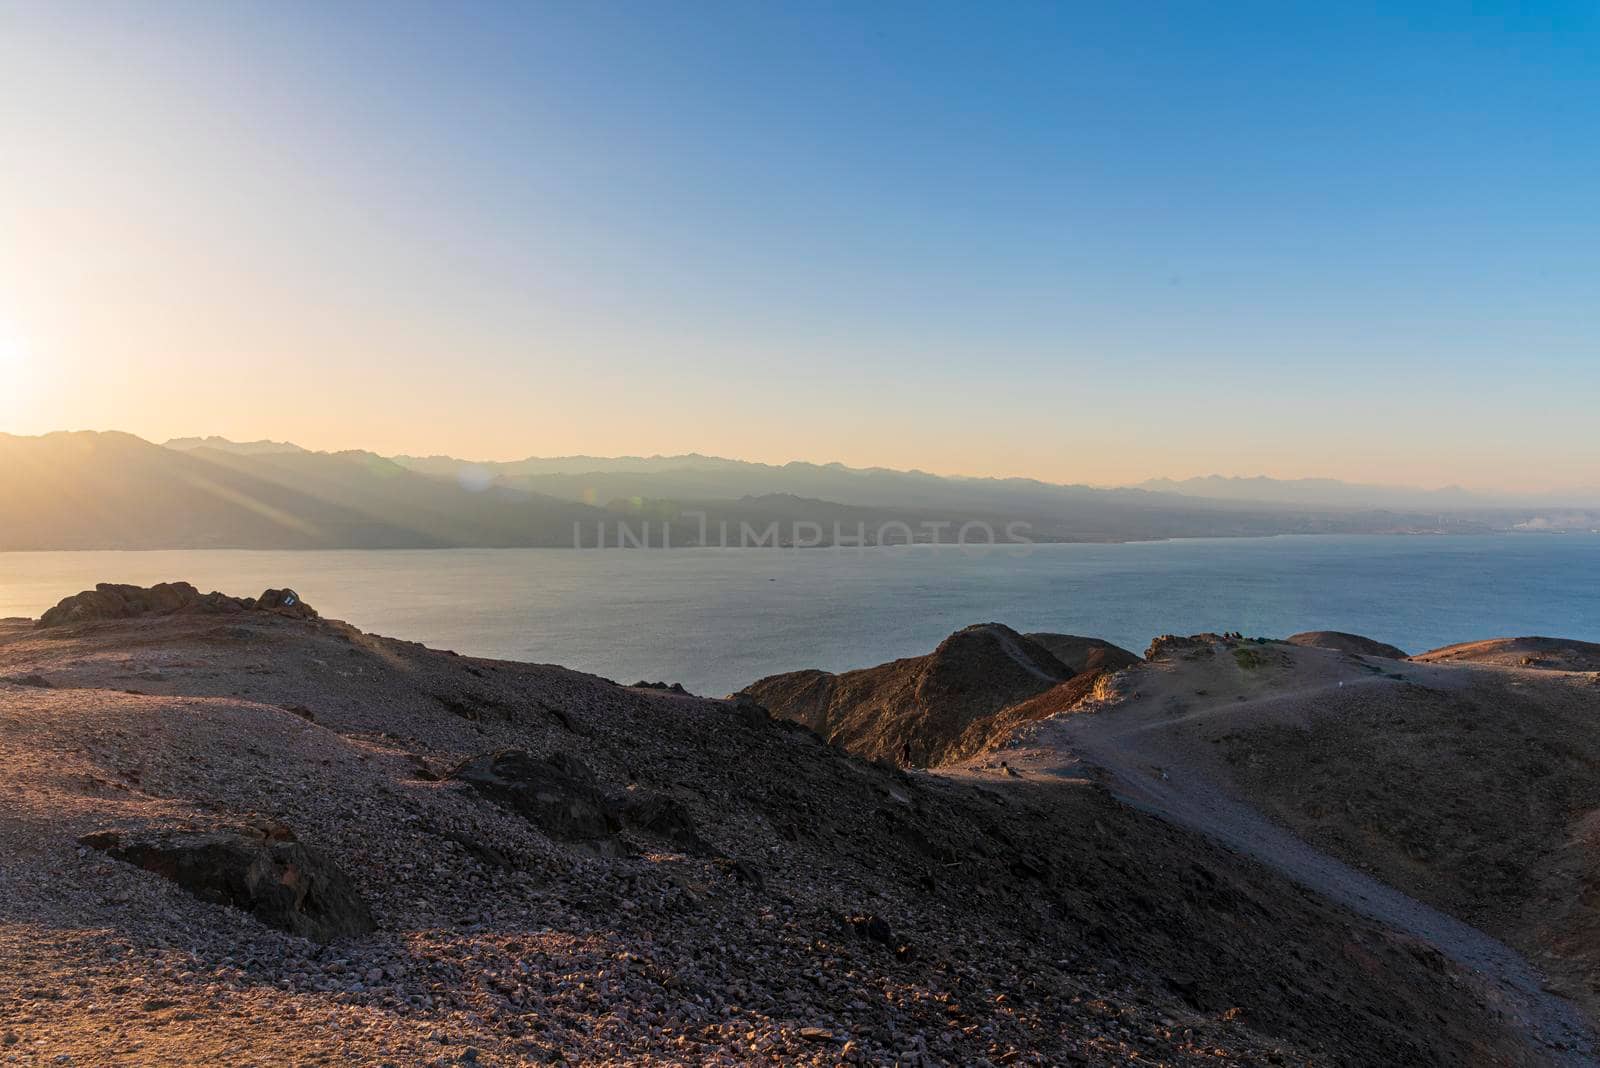 Mountains in the desert against the backdrop of the Red Sea. Shlomo mountain, Eilat Israel, Mars like Landscape. High quality photo